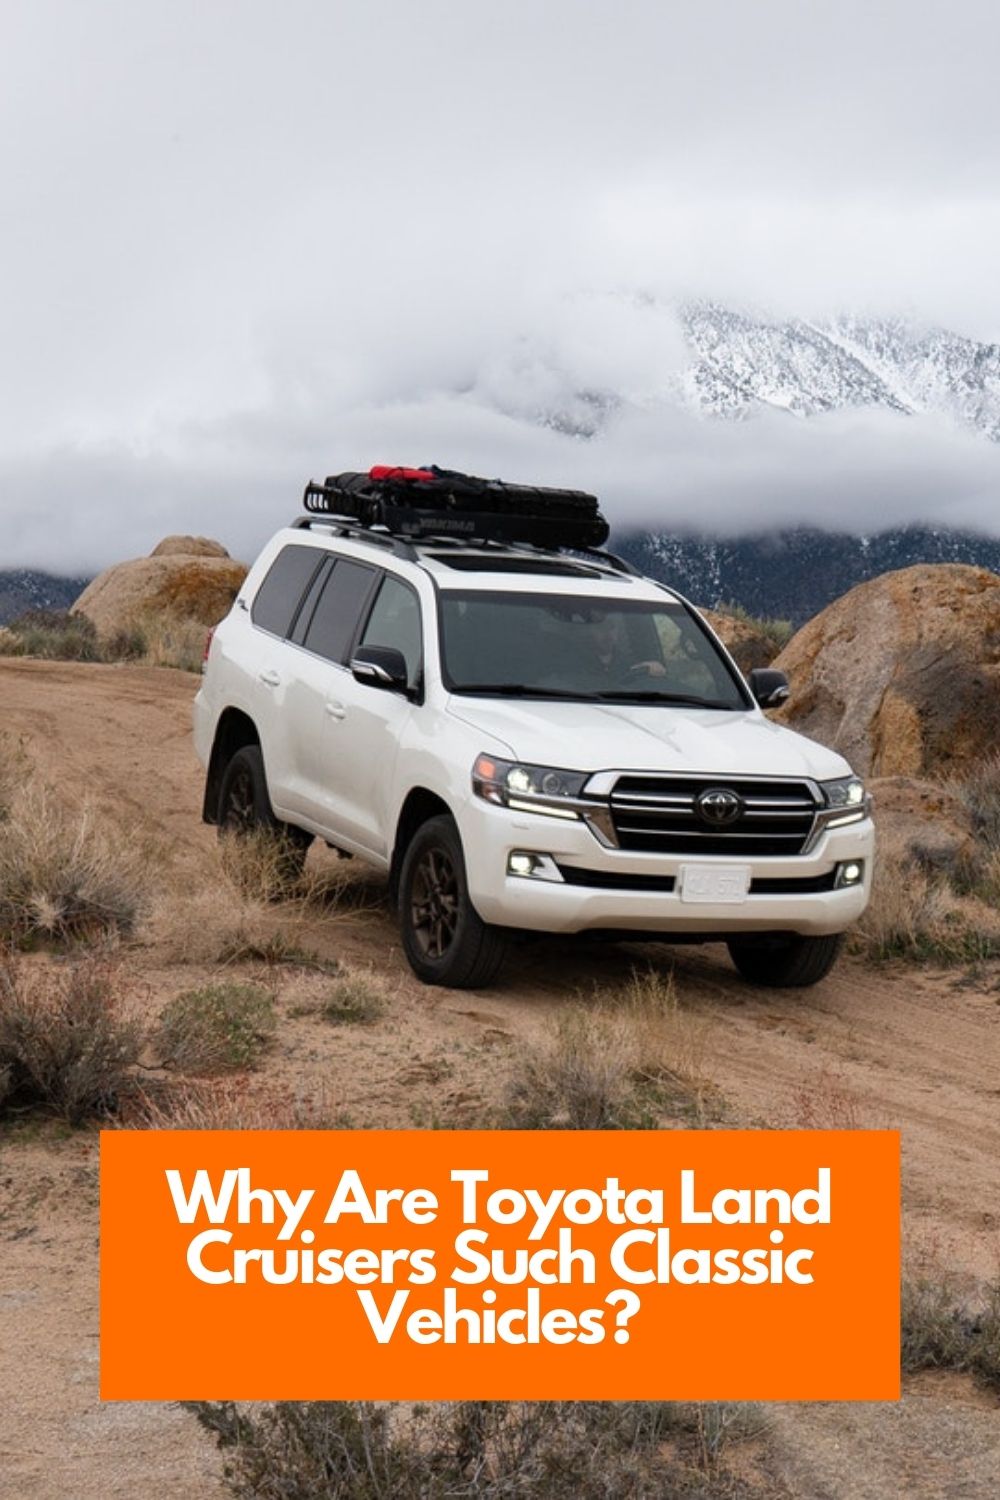 Why Are Toyota Land Cruisers Such Classic Vehicles? | Toyota of Orange